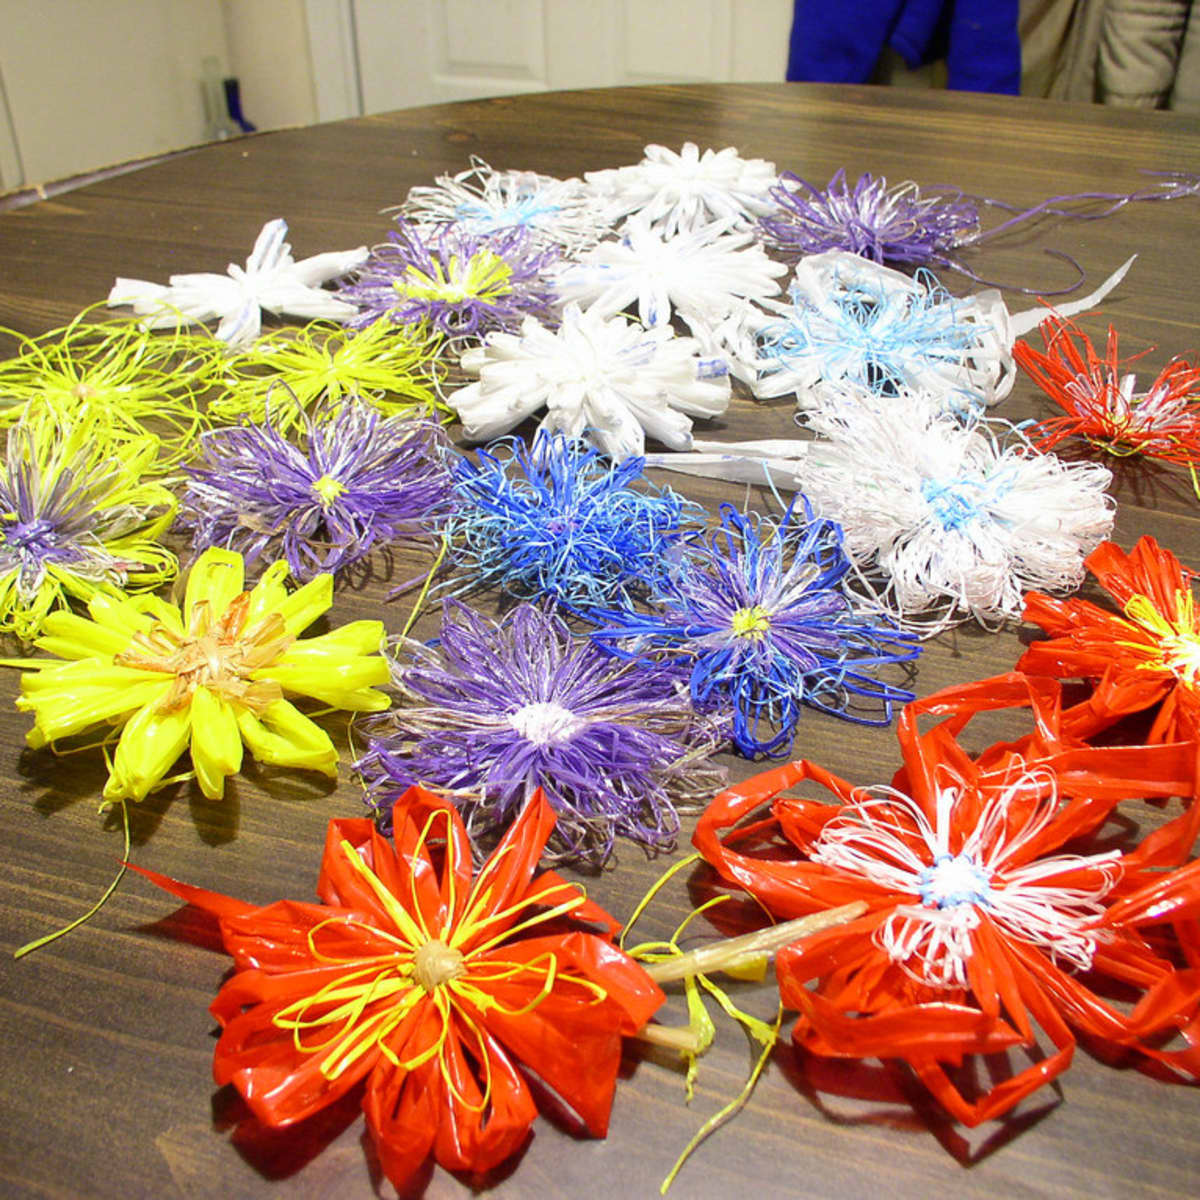 Plastic Bag Flowers, Revisited | A Magical Childhood